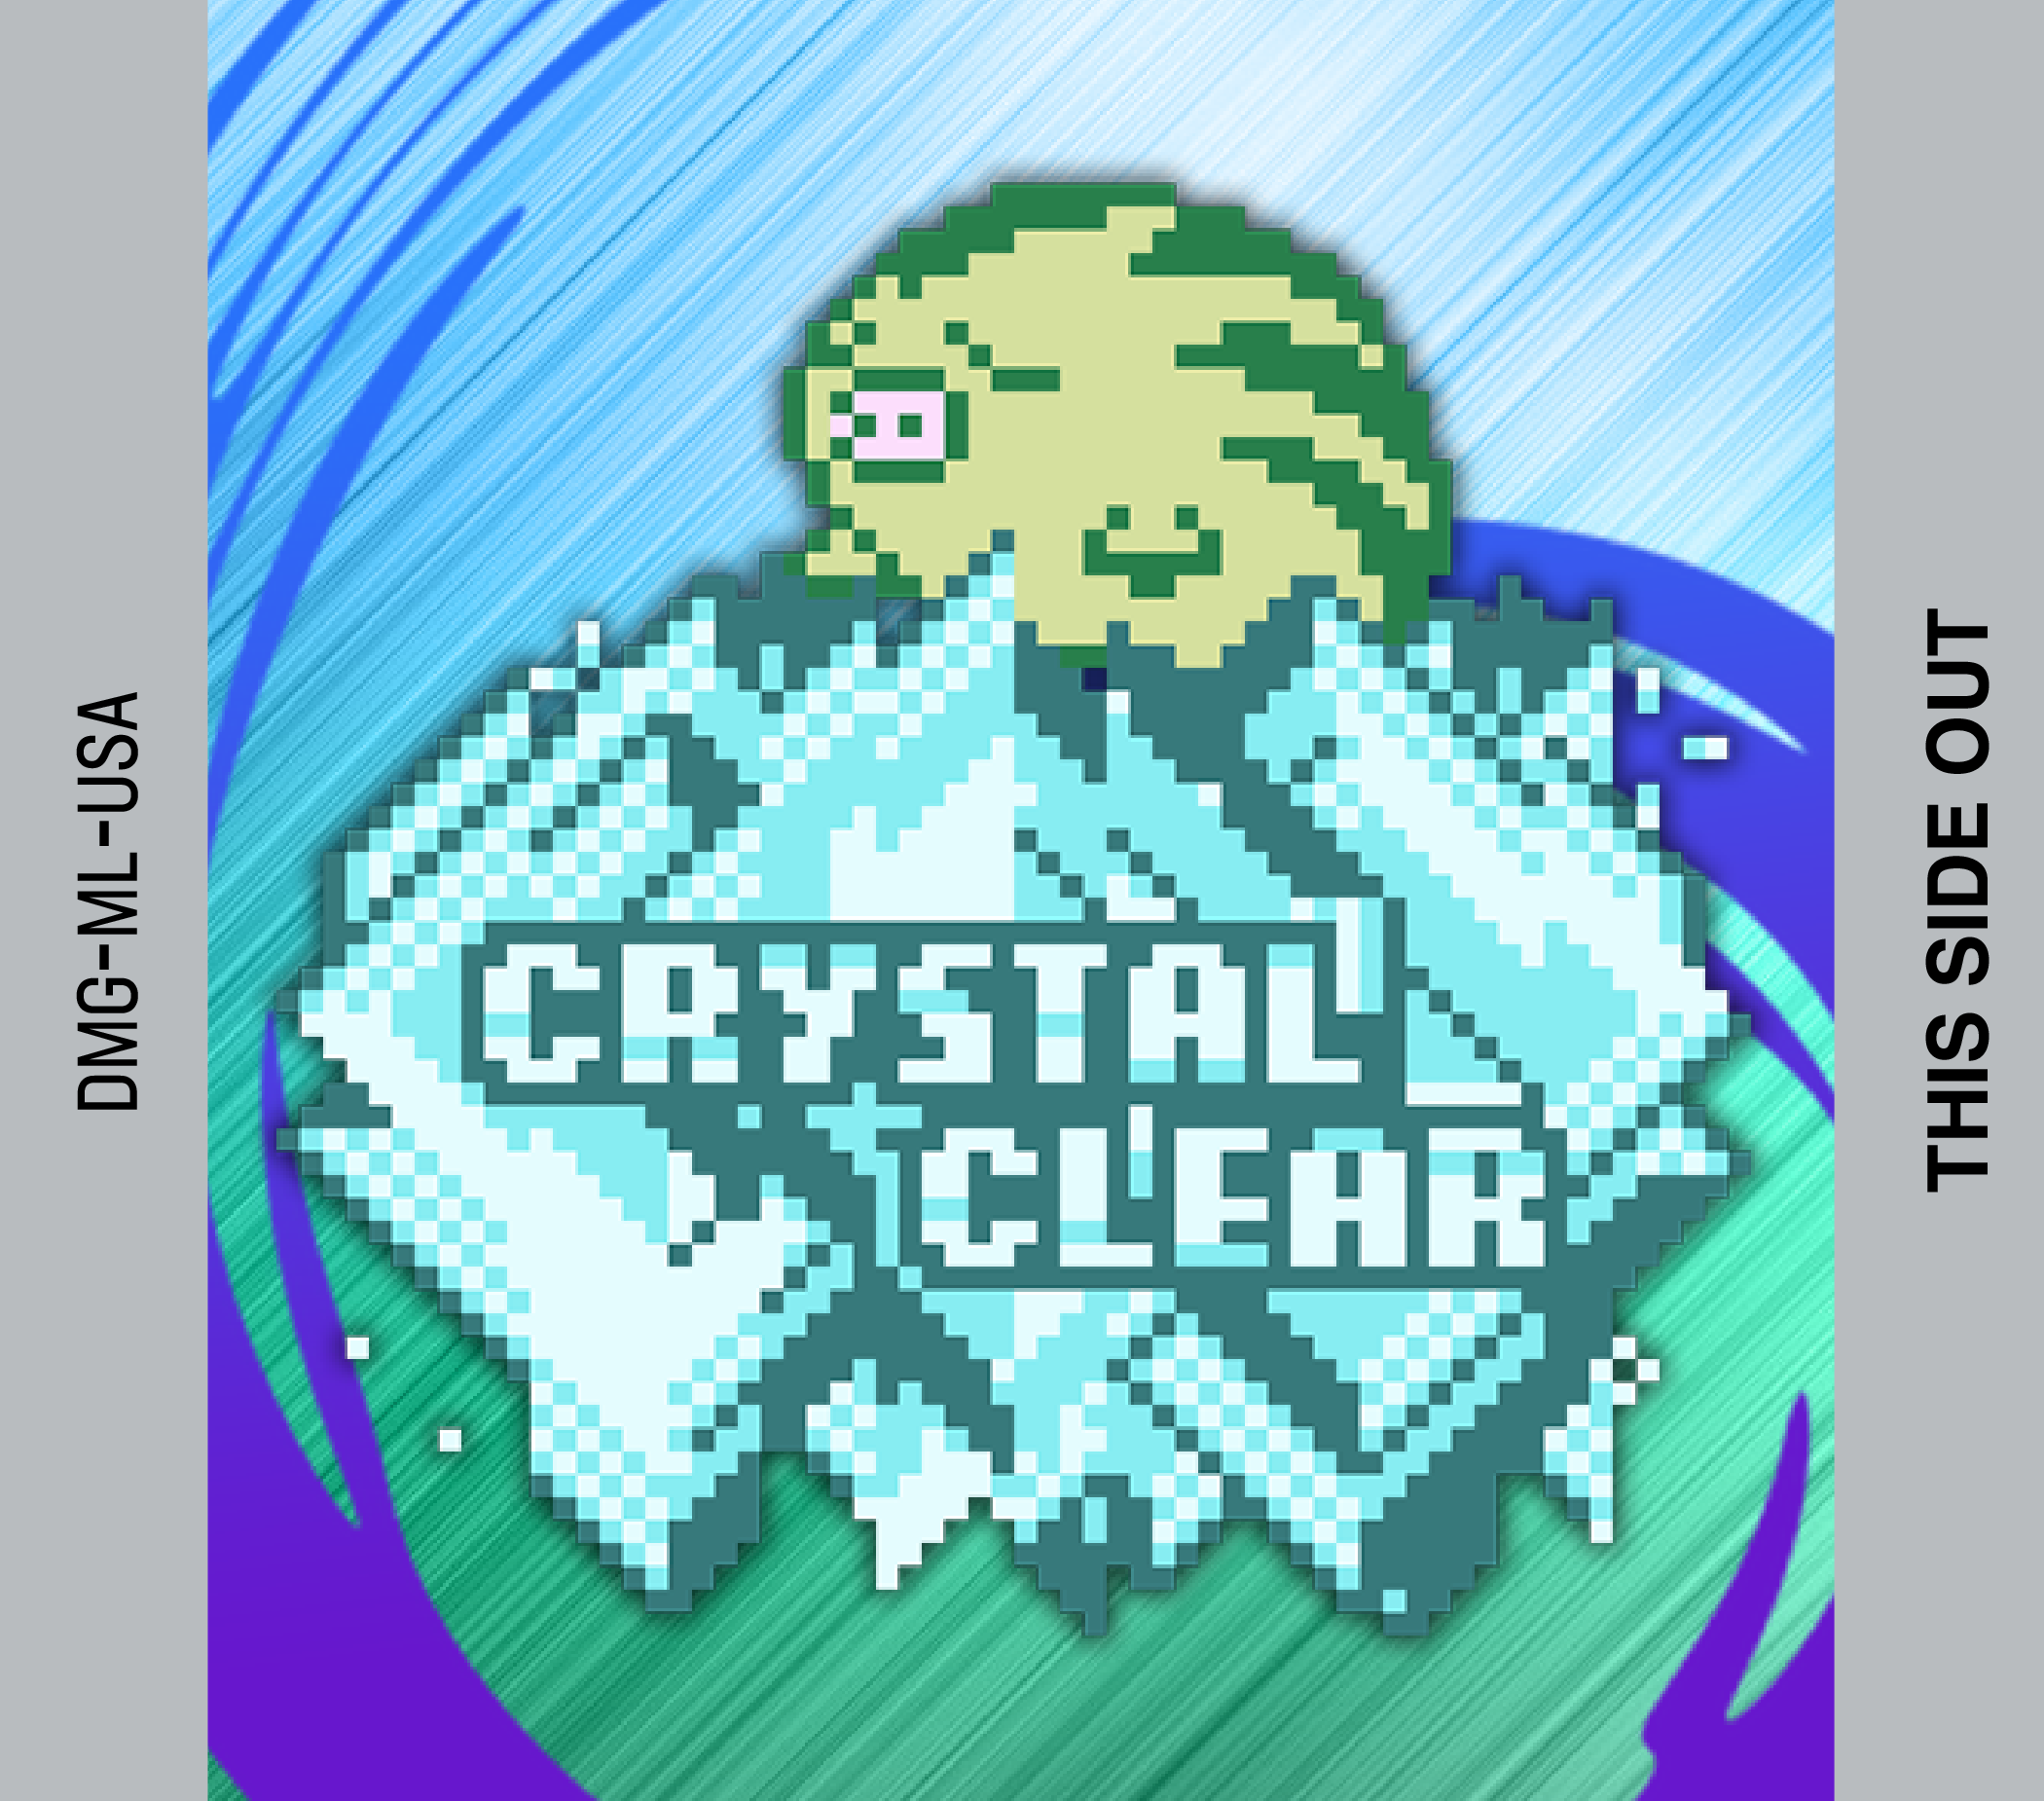 Crystal clear label